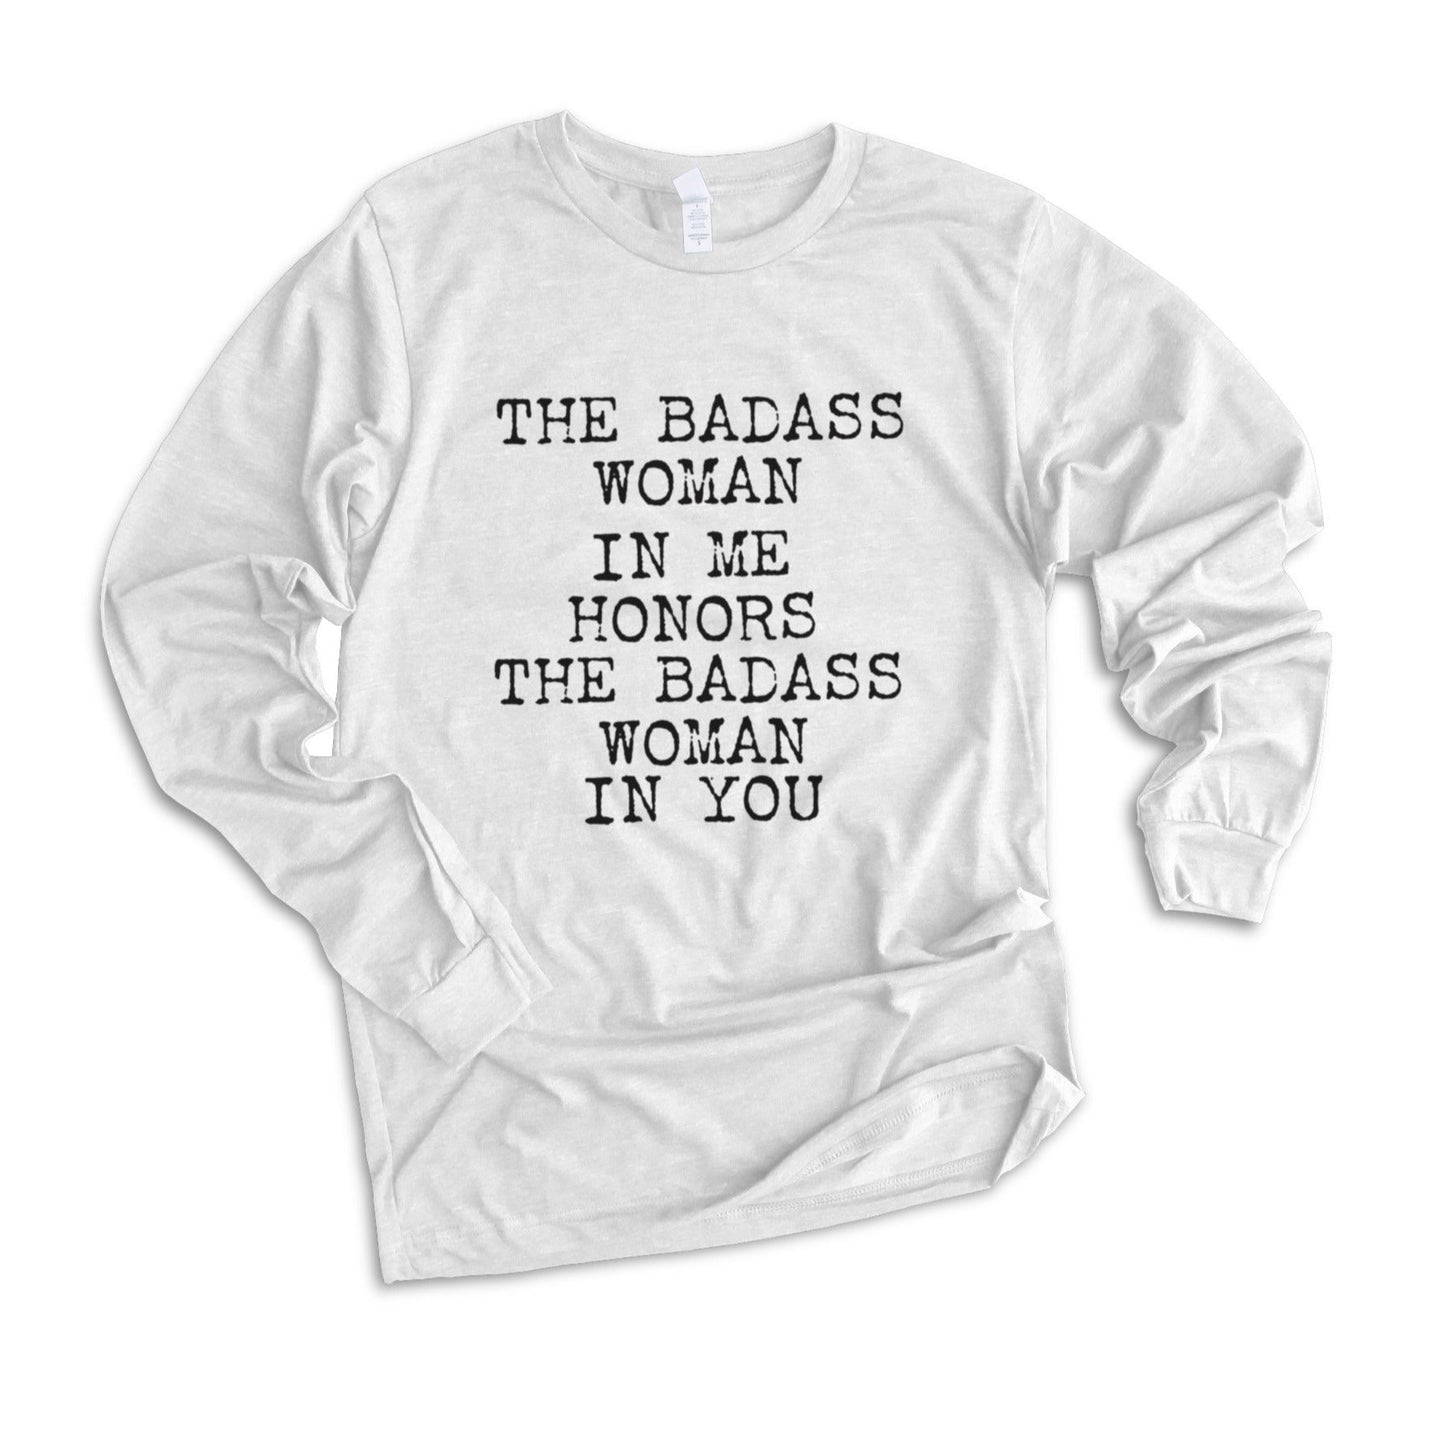 The Badass Woman In Me Honors The Badass Woman In You - Long Sleeve Tees